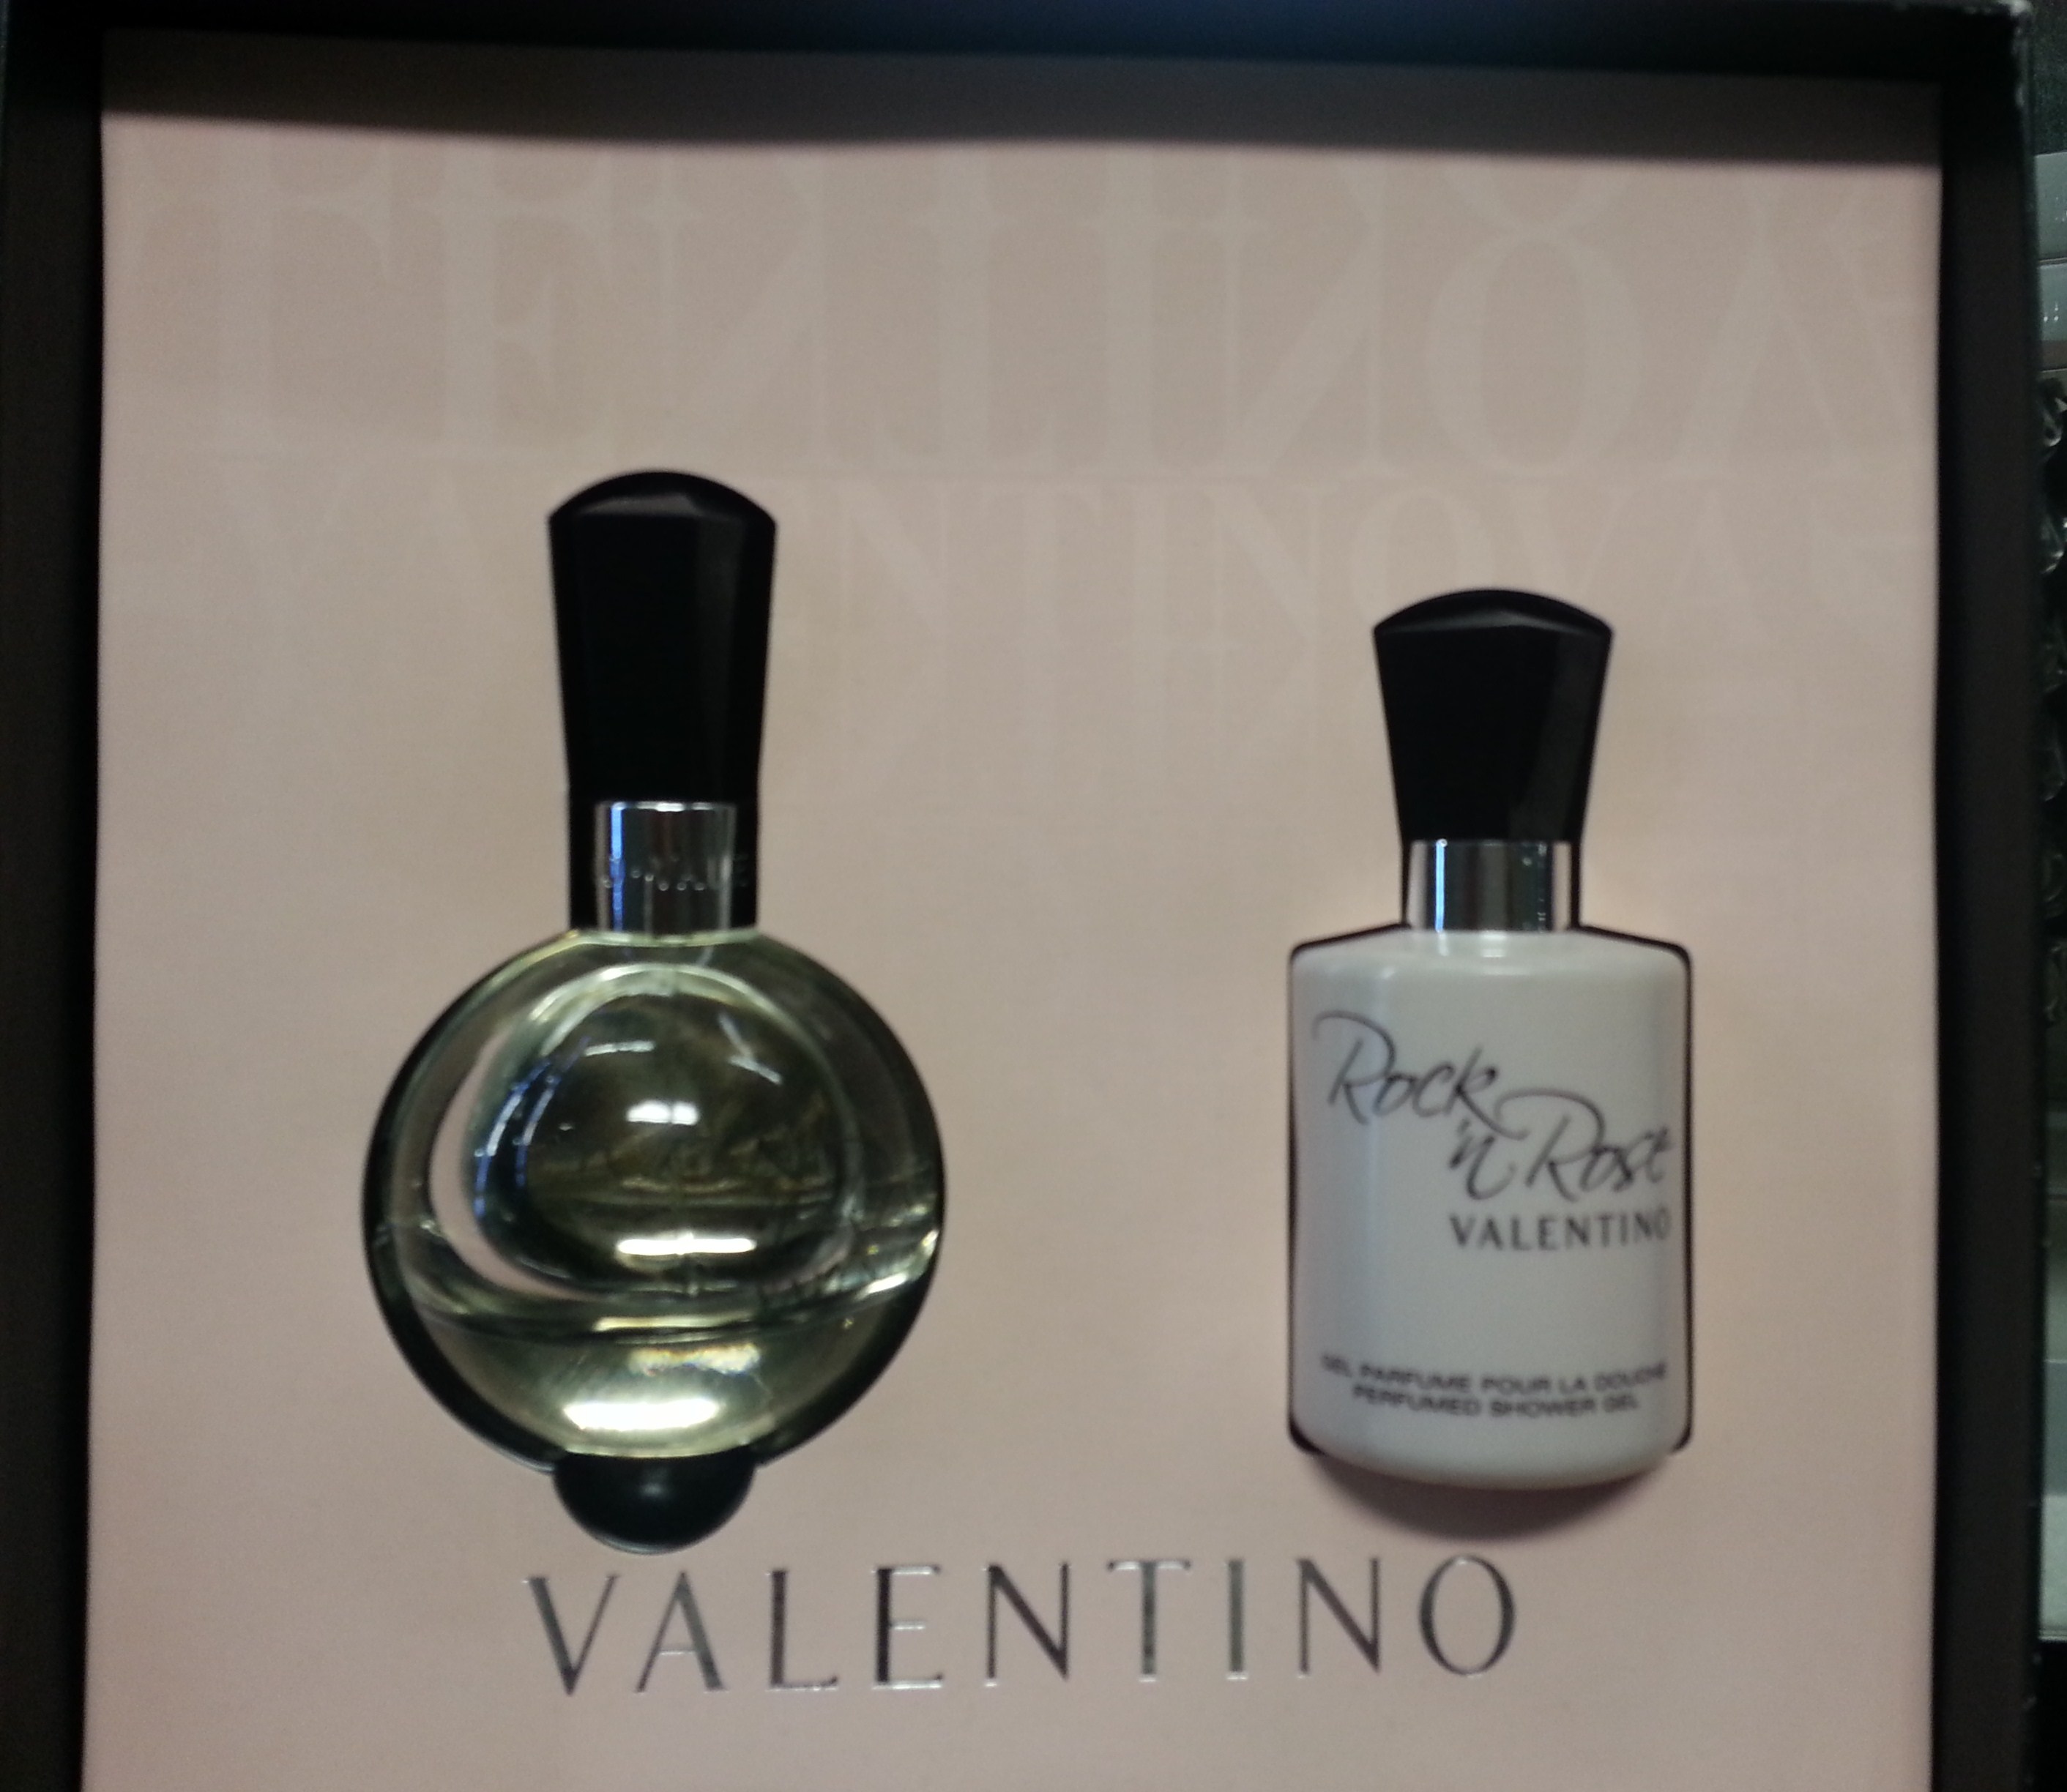 Valentino ROCK N ROSE BY VALENTINO 2-PCS SET FOR WOMAN1.6 fl.oz / 50 ml Eau De PARFUM SPRAYHARD TO FIND * LAST SET AVAILABLE